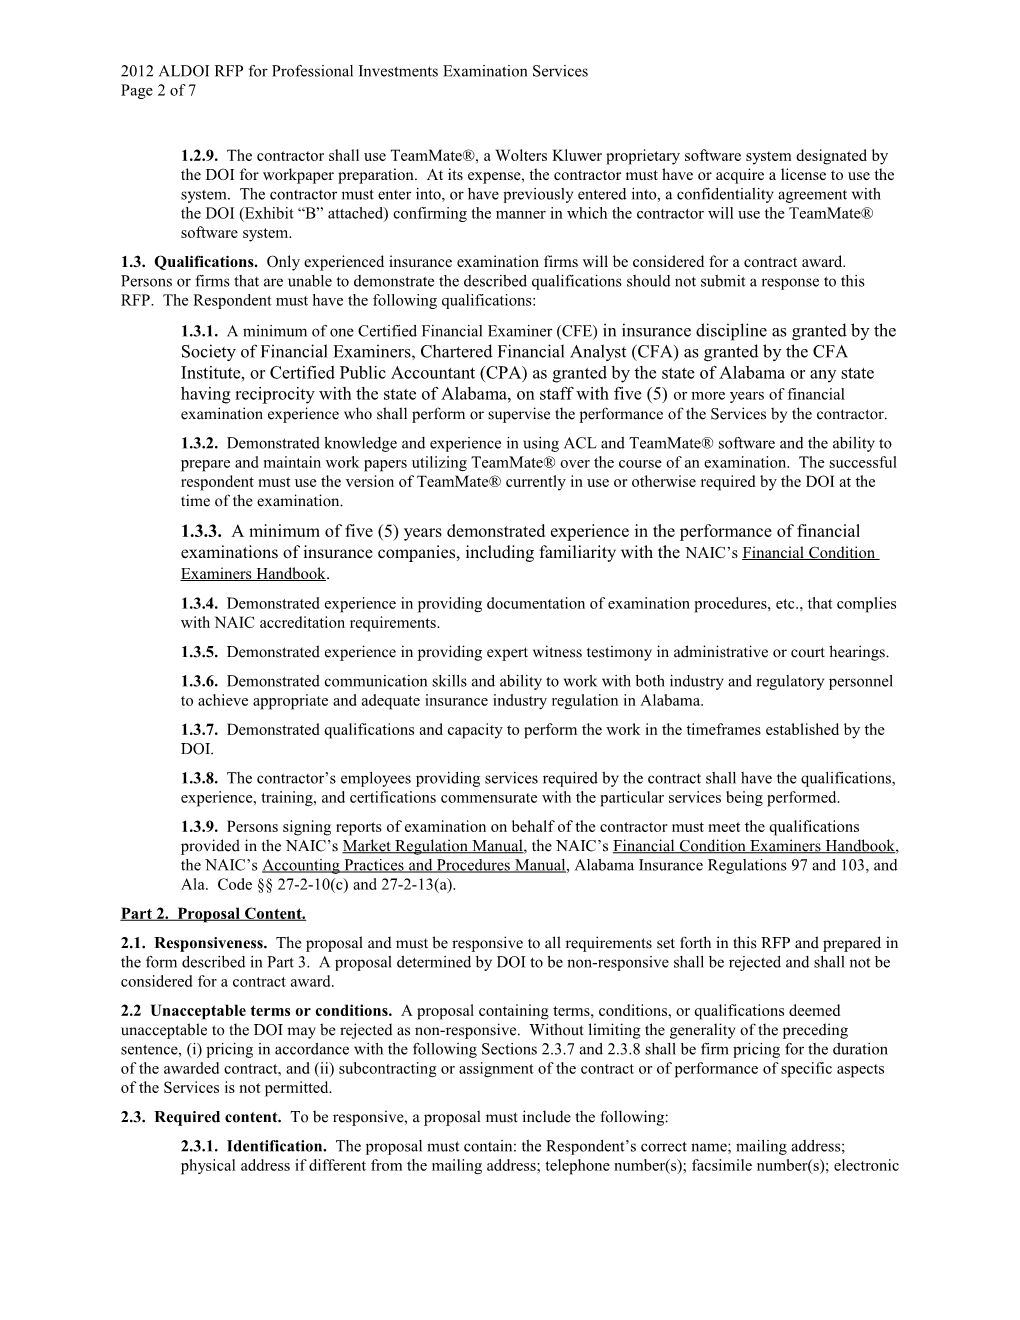 2012 ALDOI RFP for Professional Investments Examination Services